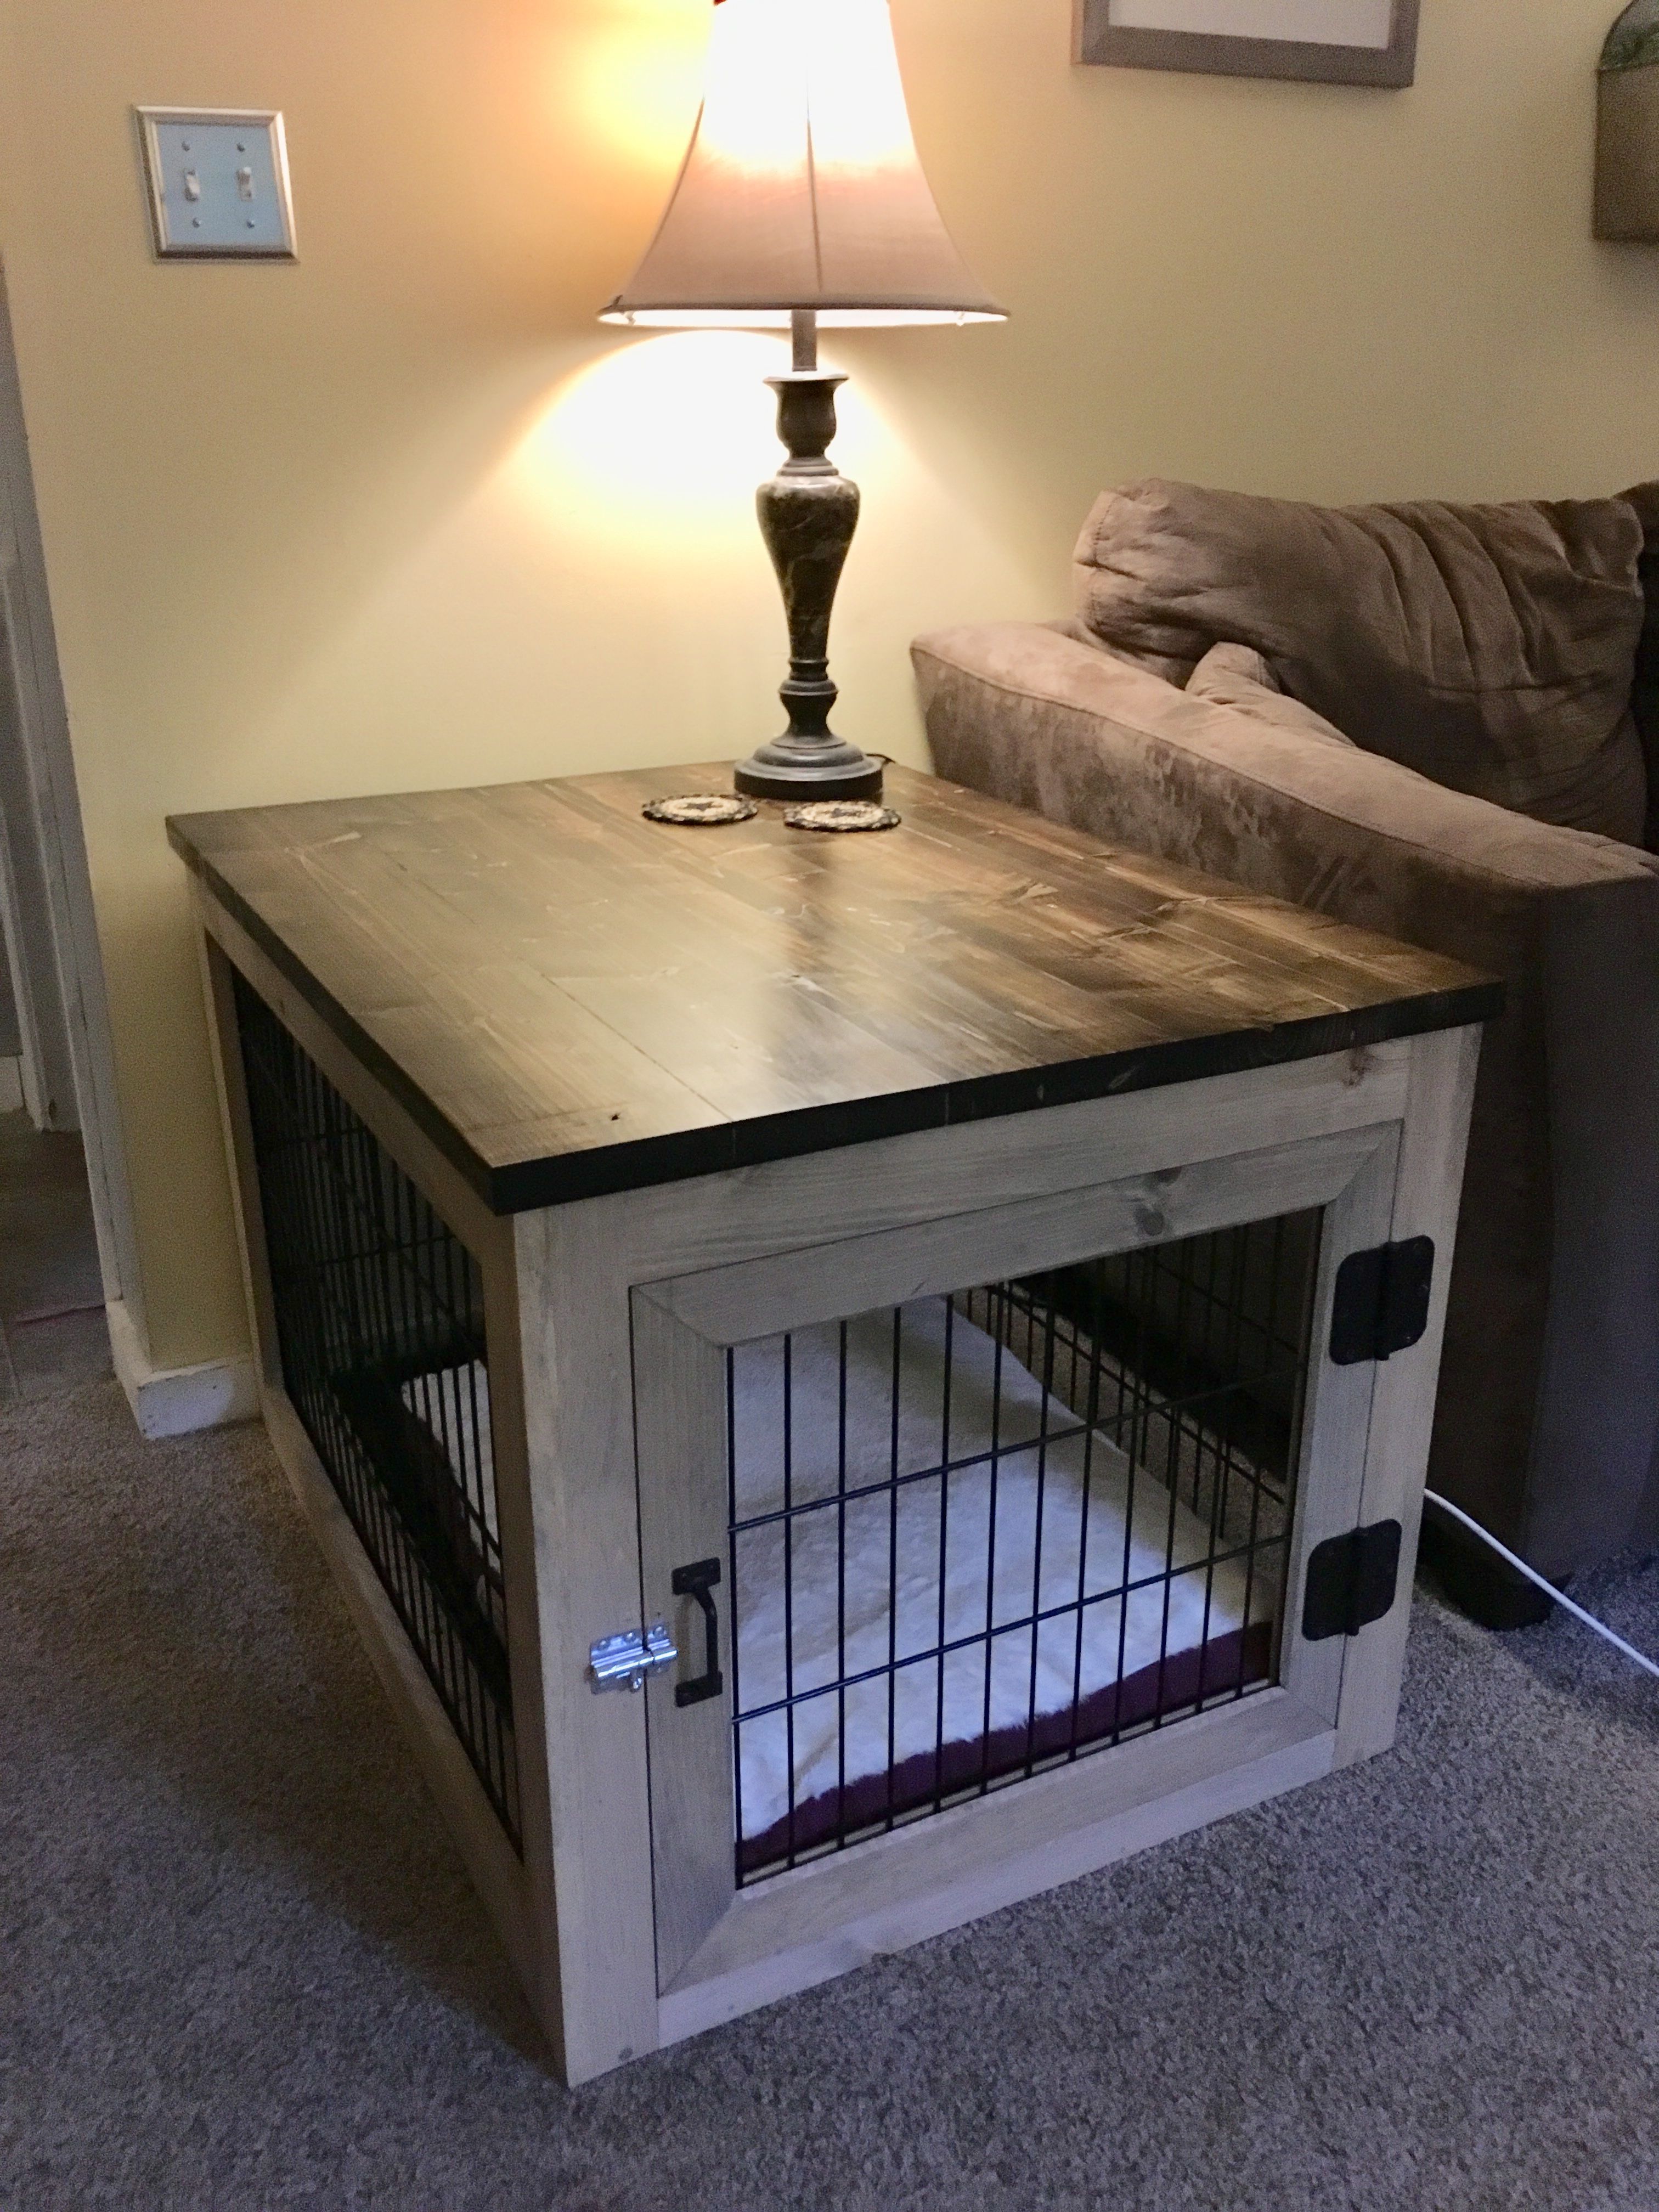 diy dog crate end table break down old wire with bolt cutters build frame around mount pieces and then top out ethan allen heirloom collection furniture row mattress industrial